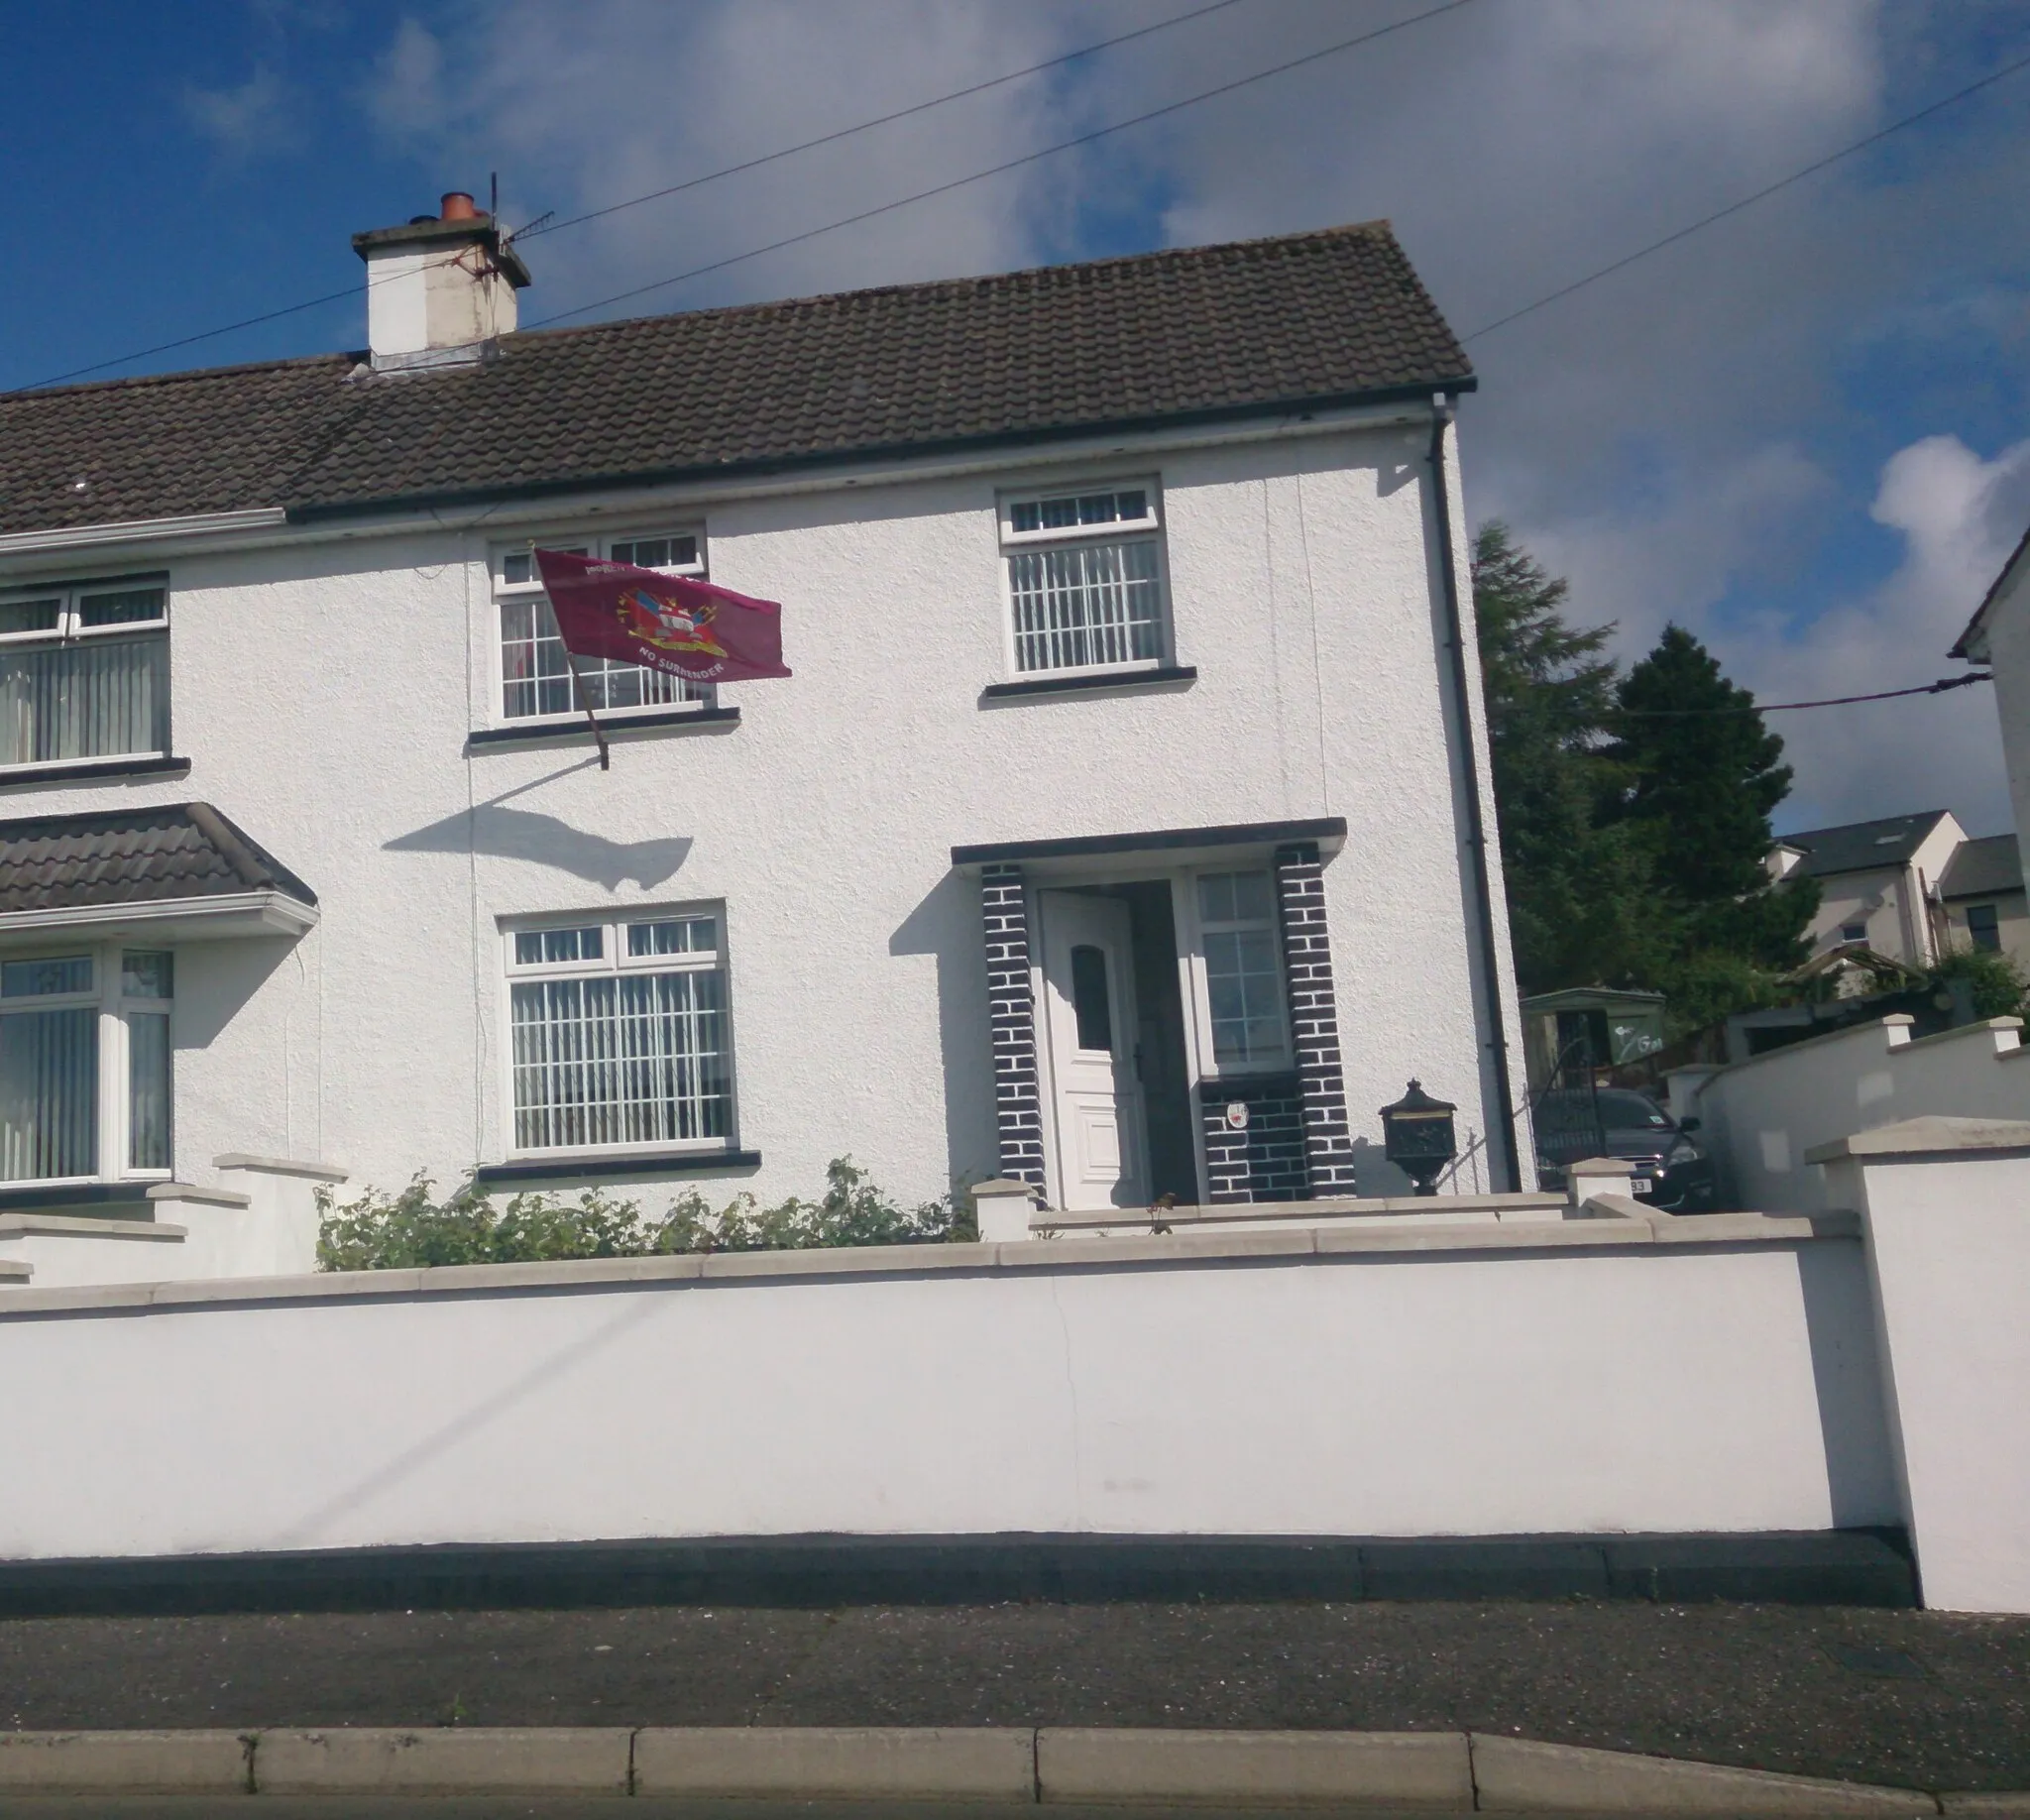 Photo showing: A house in Irwin Crescent, Claudy flying an Apprentice Boys of Derry flag.